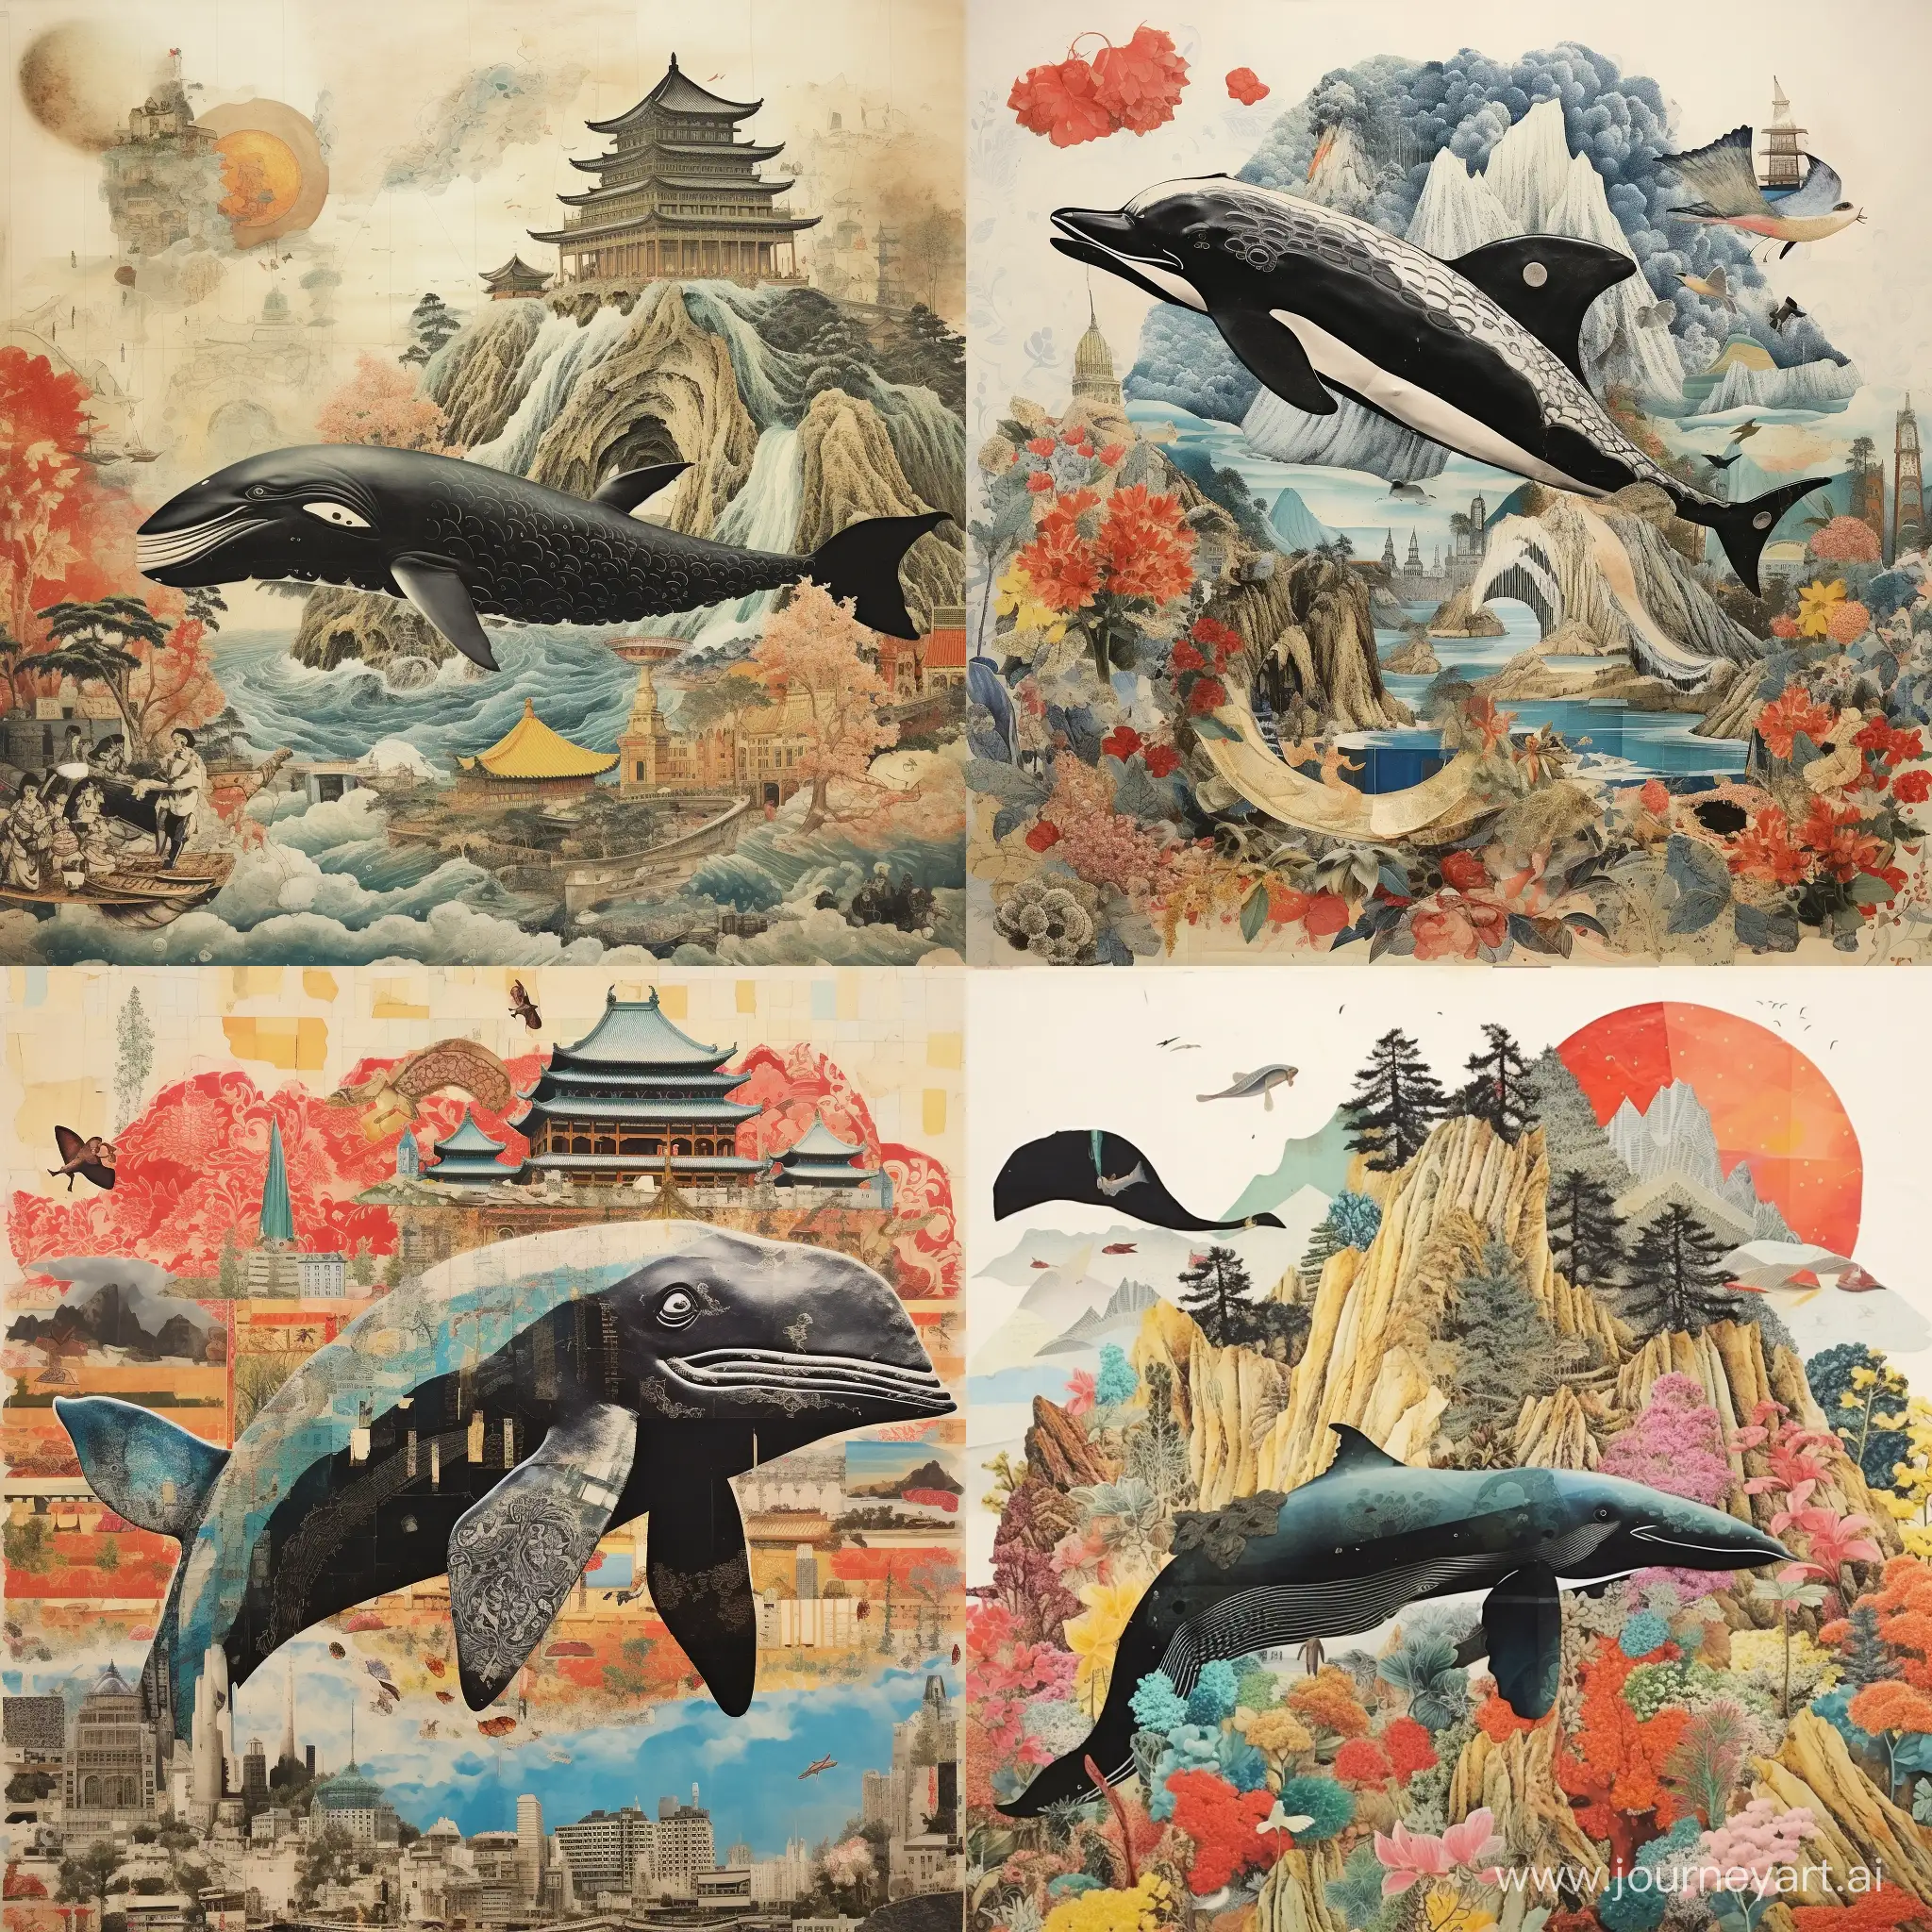 WhaleShaped-Fusion-Harmony-of-Chinese-and-Western-Visual-Art-Collage